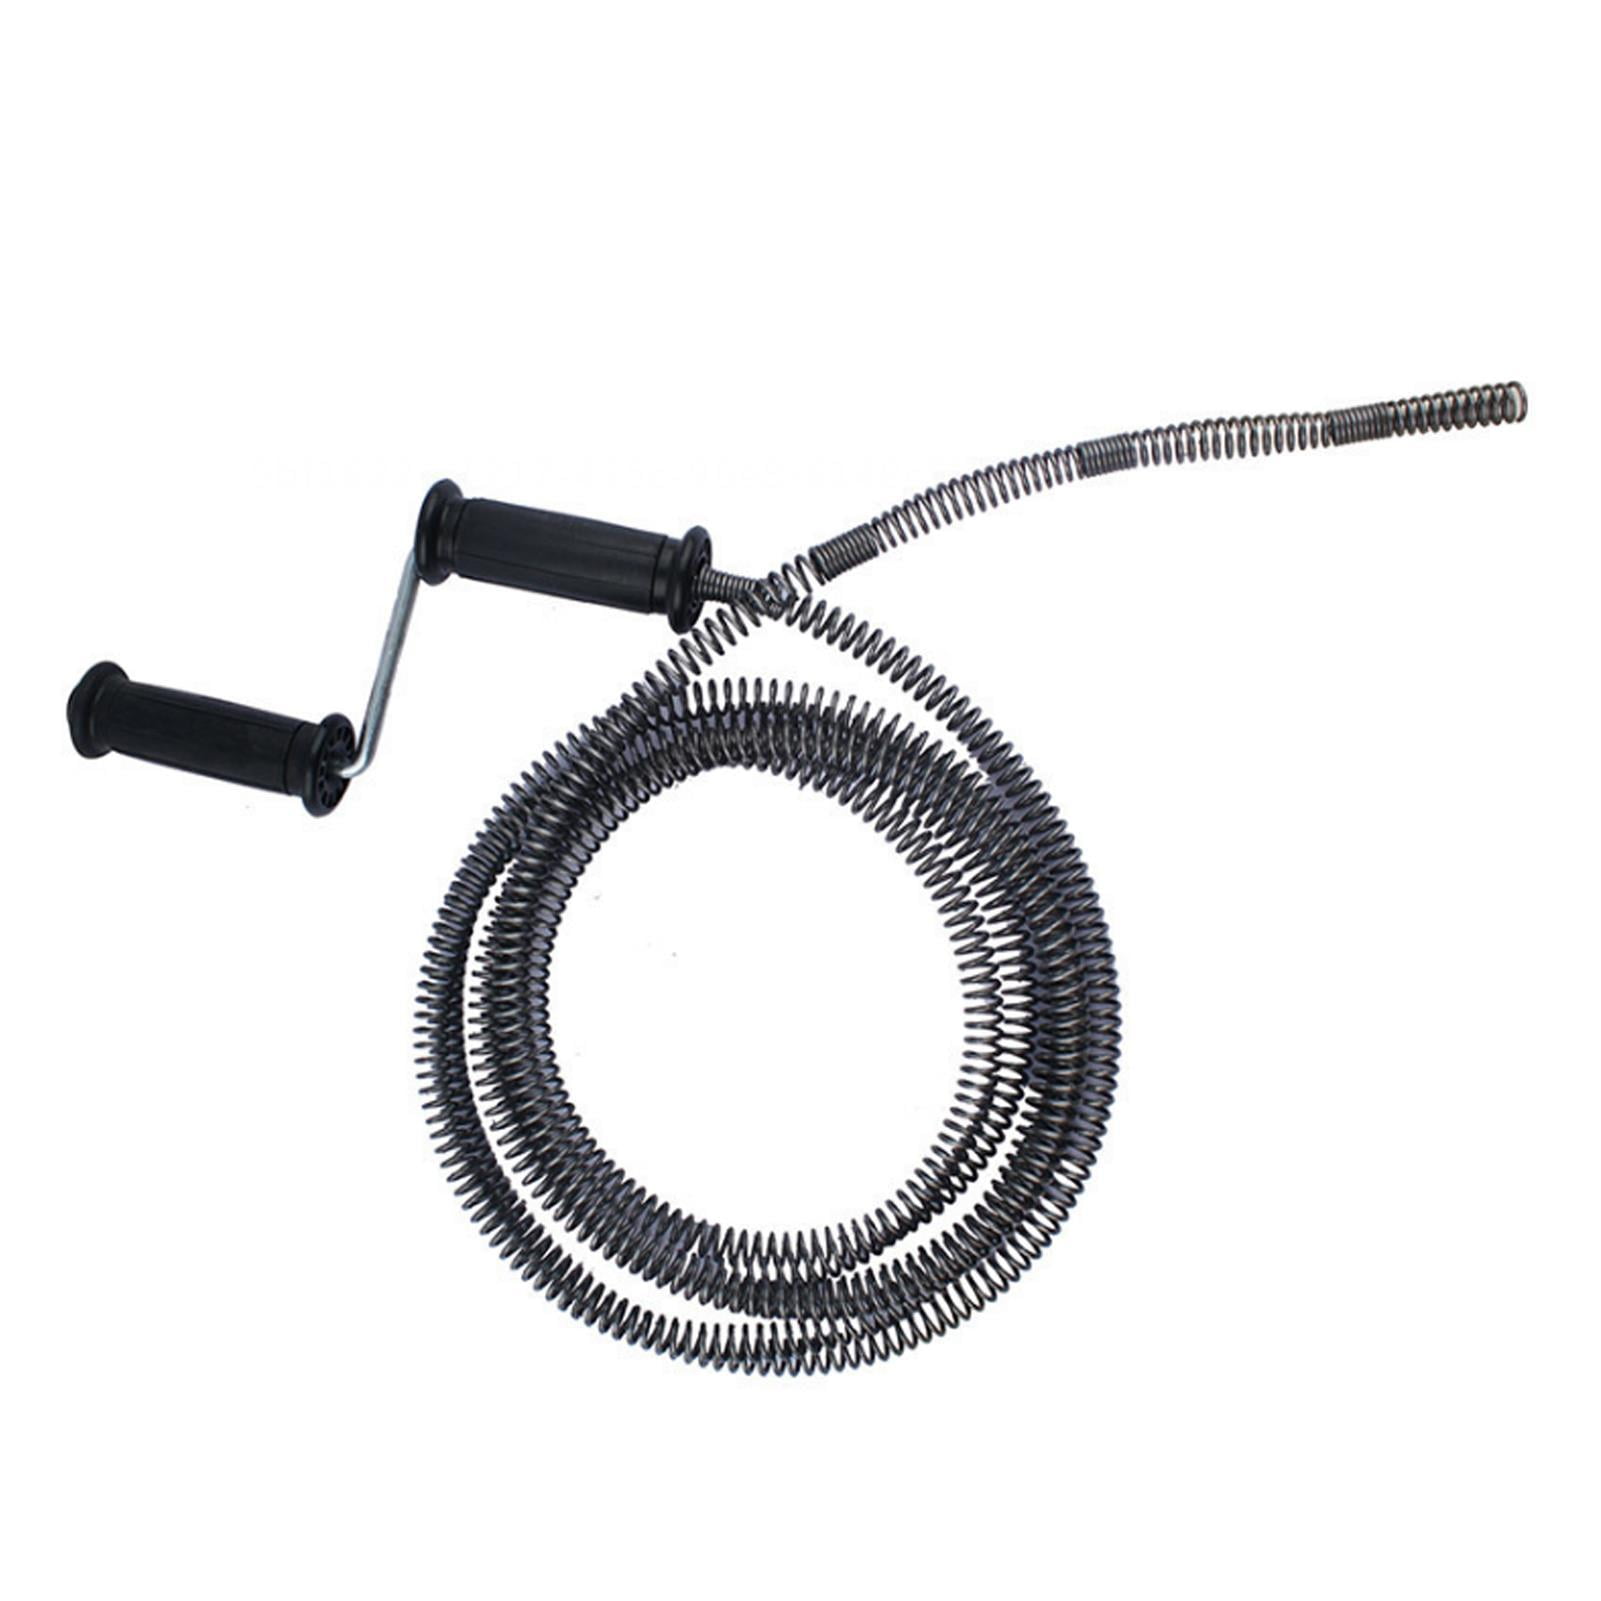 Sink Pipe Drain Cleaner Auger Plunger With 5m 7m Snake Cable